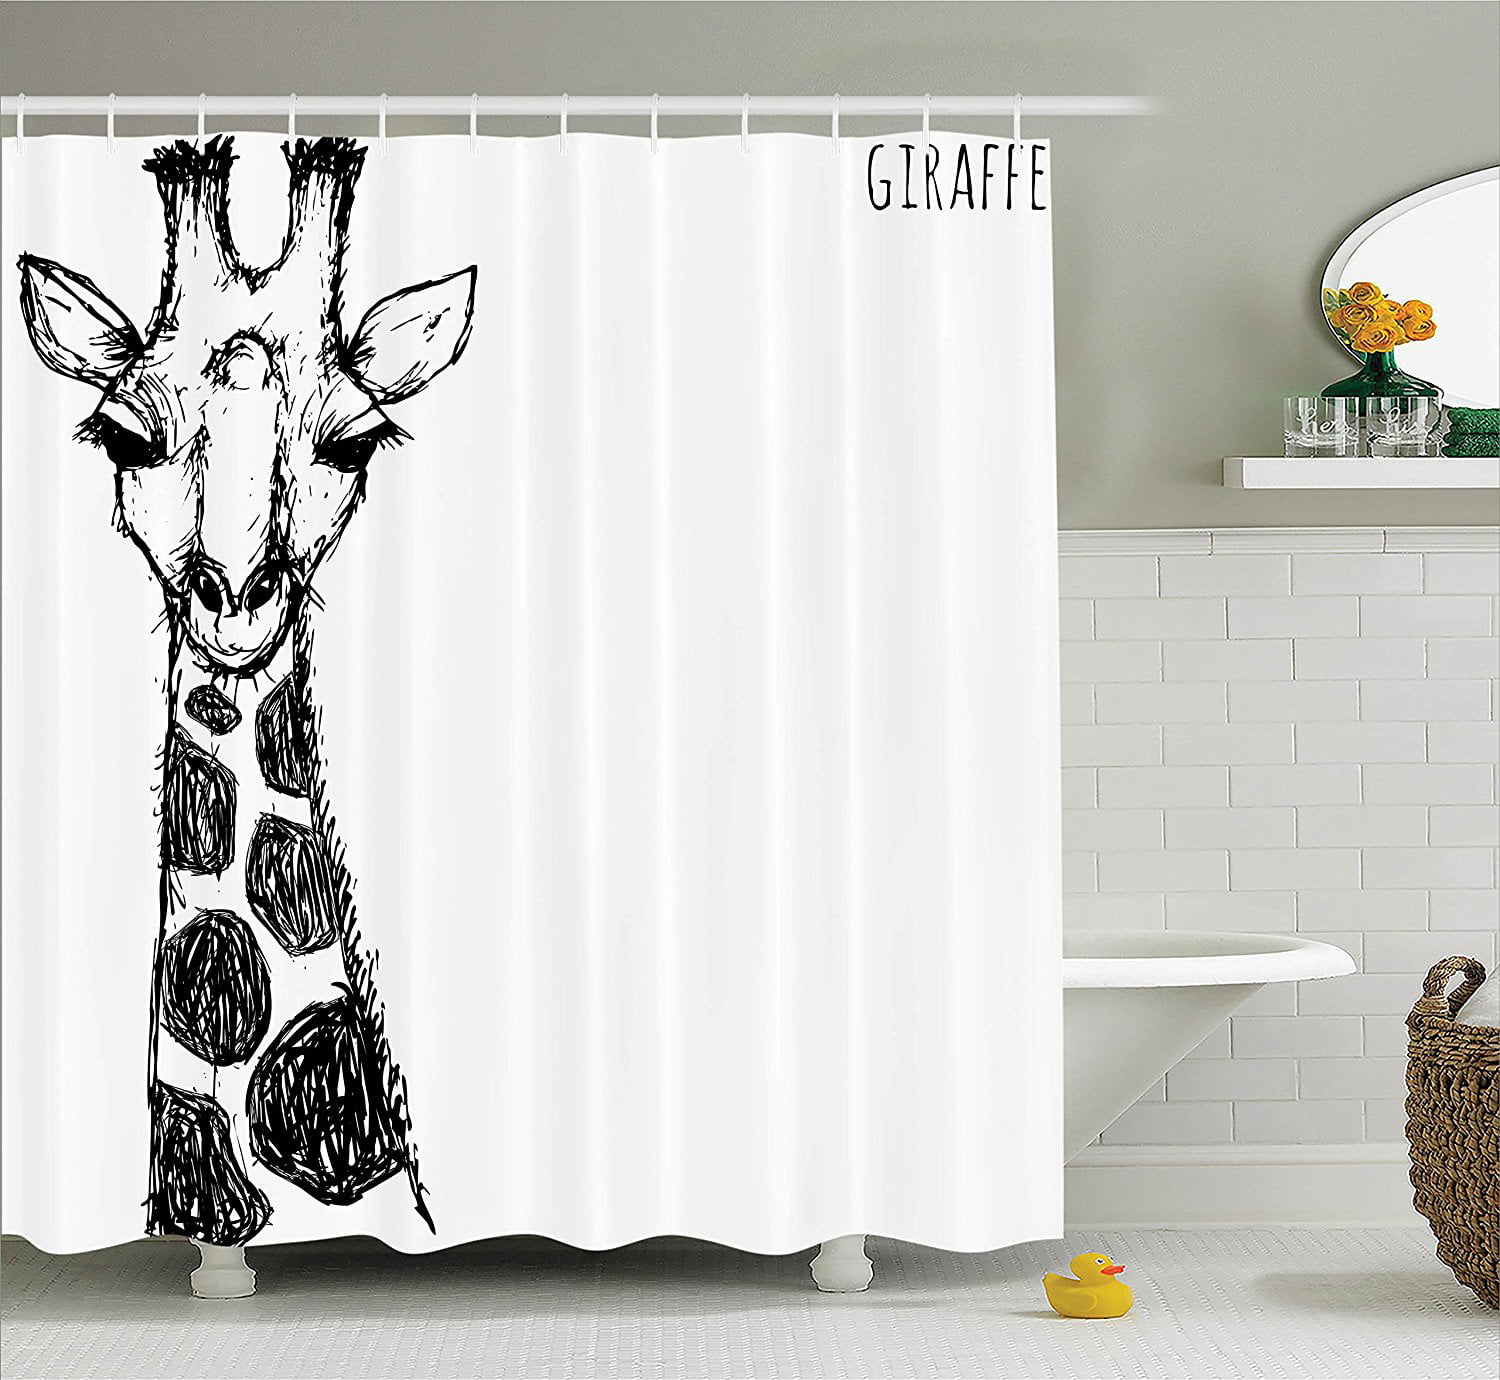 Details about   Fabric Shower Curtain Digital Mix Motif Shapes Print for Bathroom 